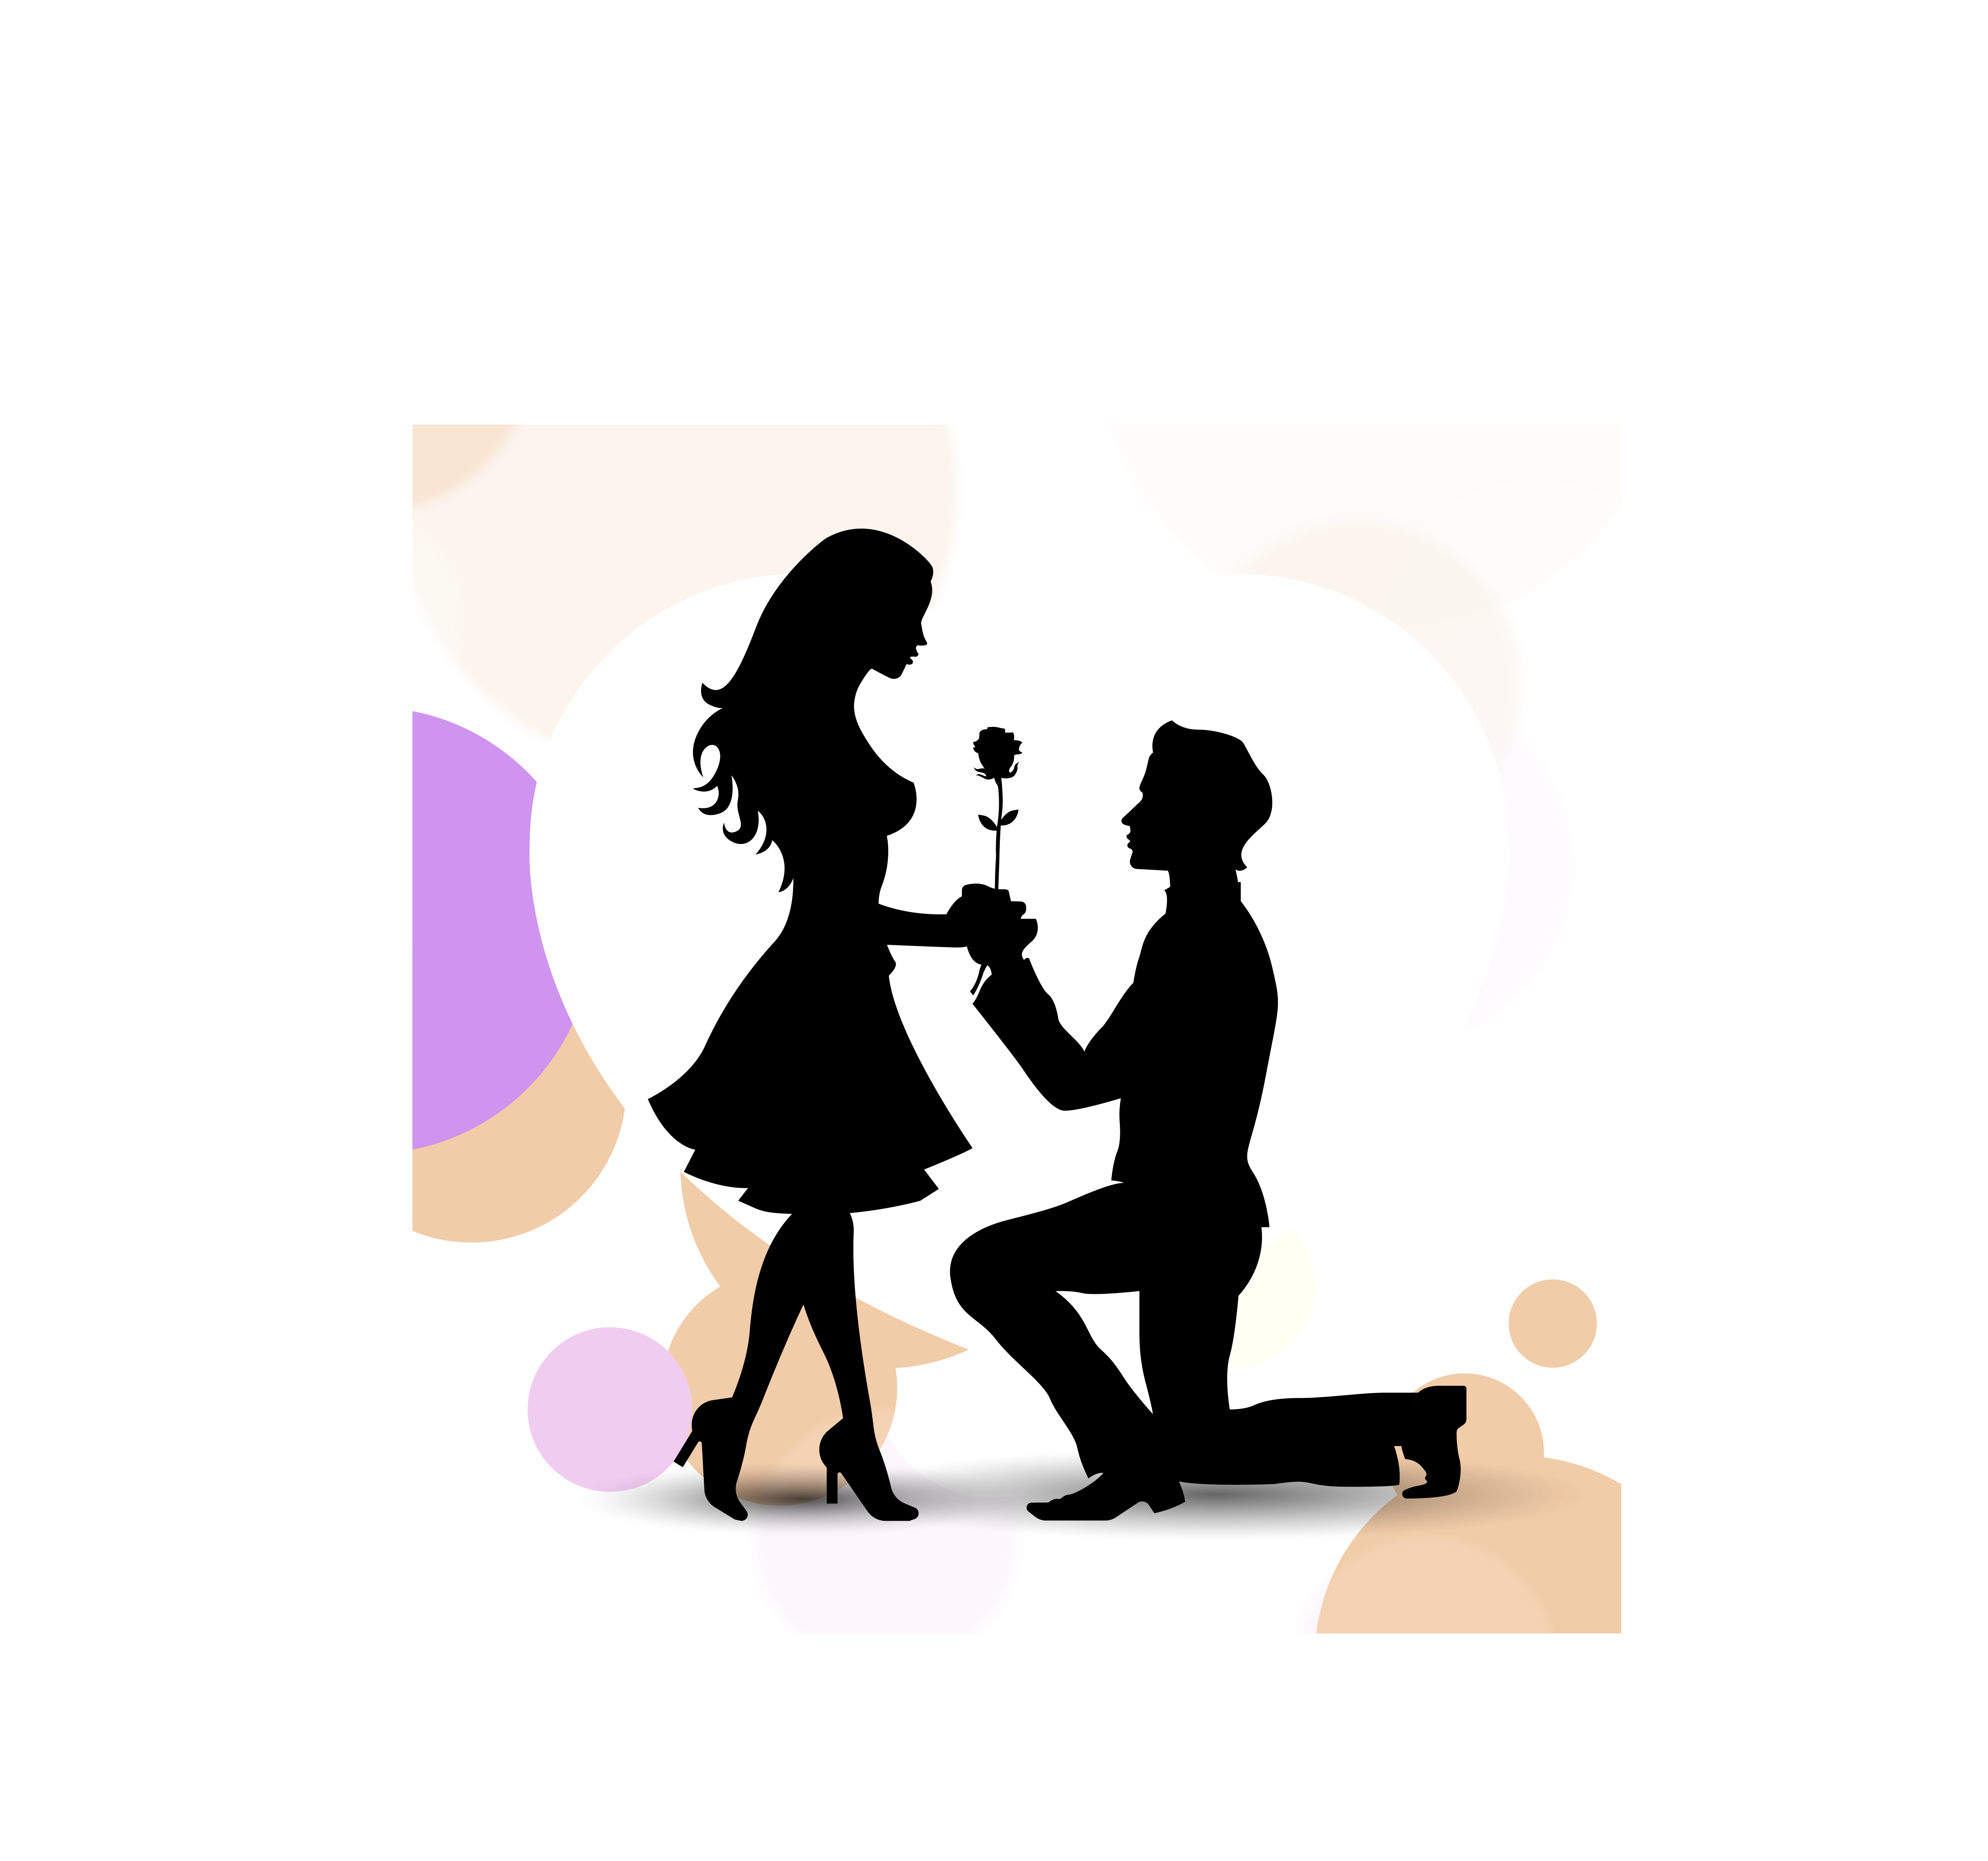 Groom clipart engagement proposal. Marriage silhouette at getdrawings